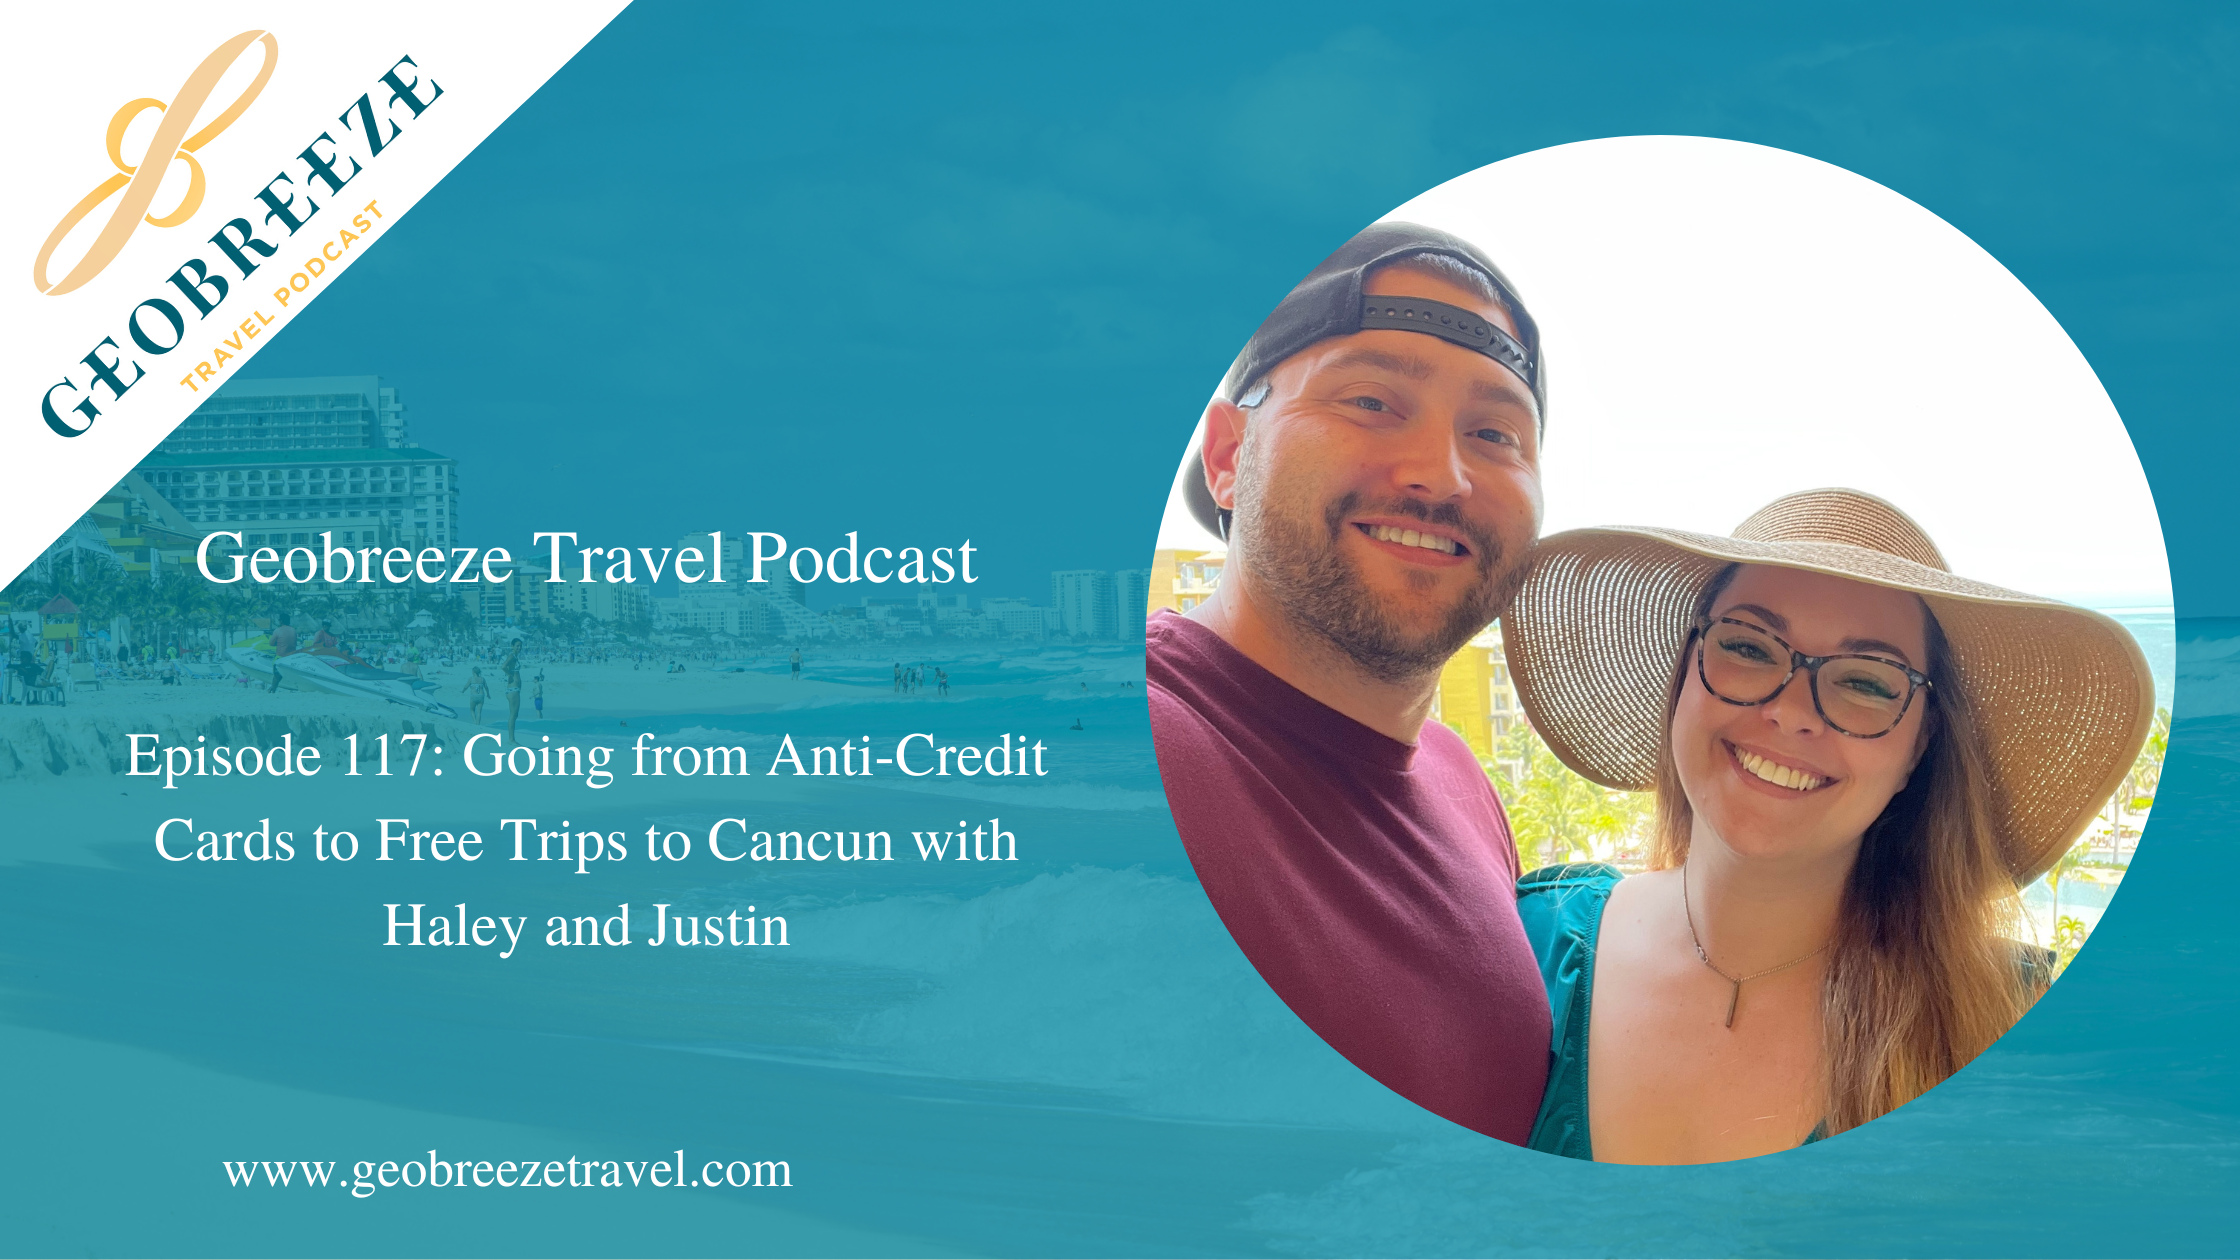 Episode 117: From Anti-Credit Cards to Free Trips to Cancun with Haley and Justin